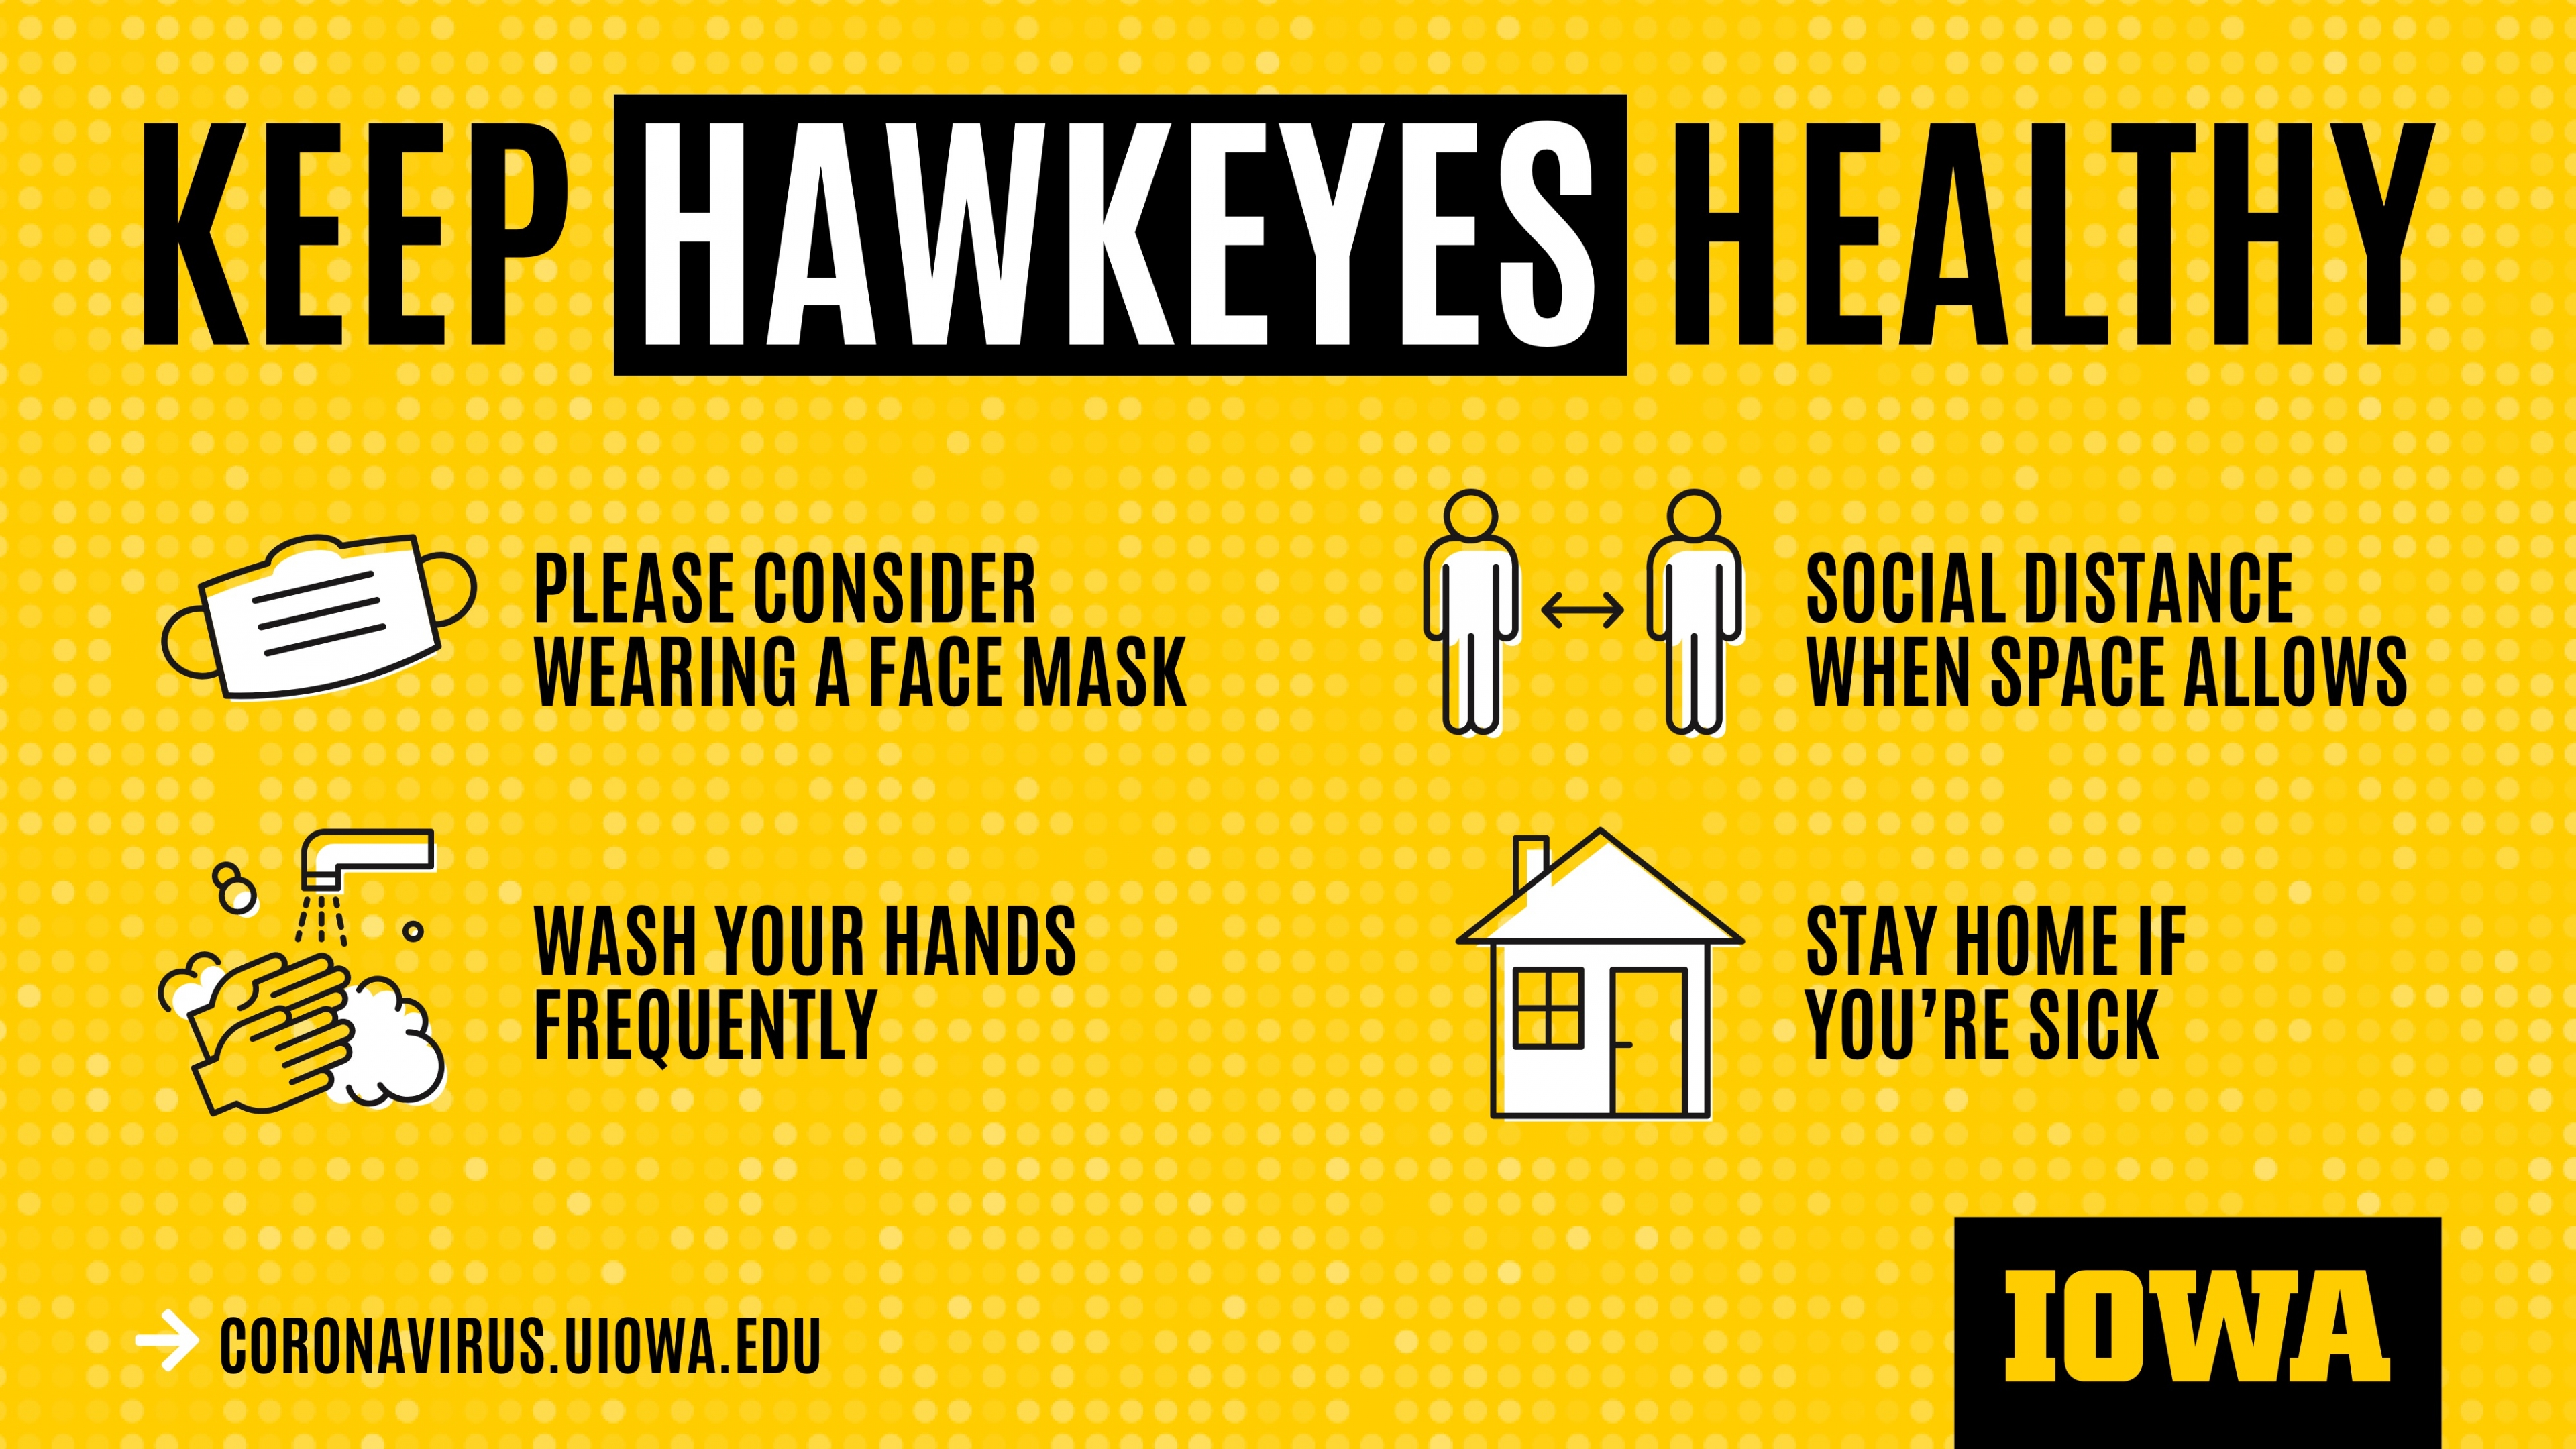 A screen reading as follows: "Keep Hawkeyes healthy. Please consider wearing a face mask. Wash your hands frequently. Social distance when space allows. Stay home if you're sick. coronavirus.uiowa.edu"